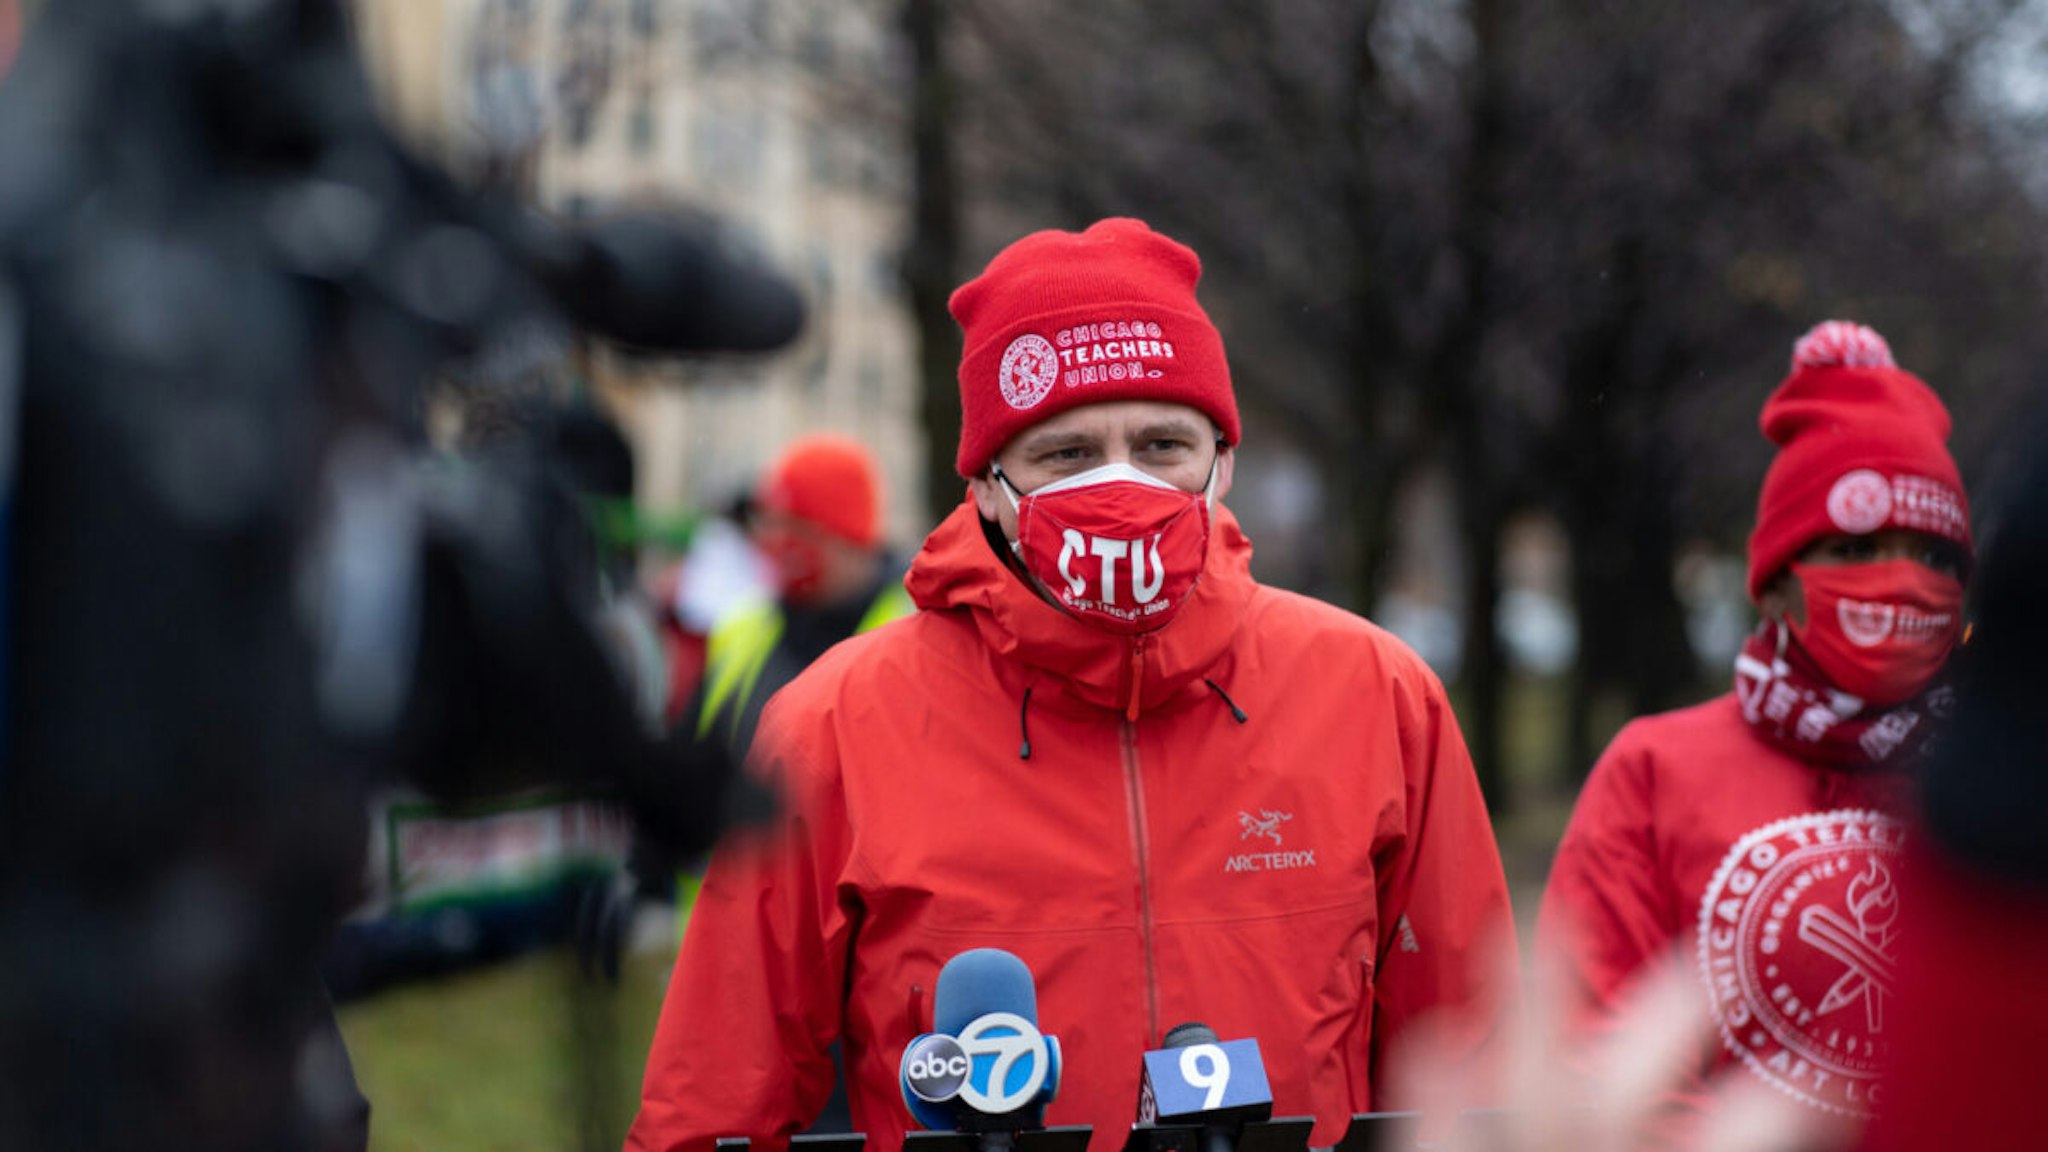 Chicago Teachers Union President Jesse Sharkey speaks ahead of a car caravan where teachers and supporters gathered to demand a safe and equitable return to in-person learning during the COVID-19 pandemic in Chicago, IL on December 12, 2020.